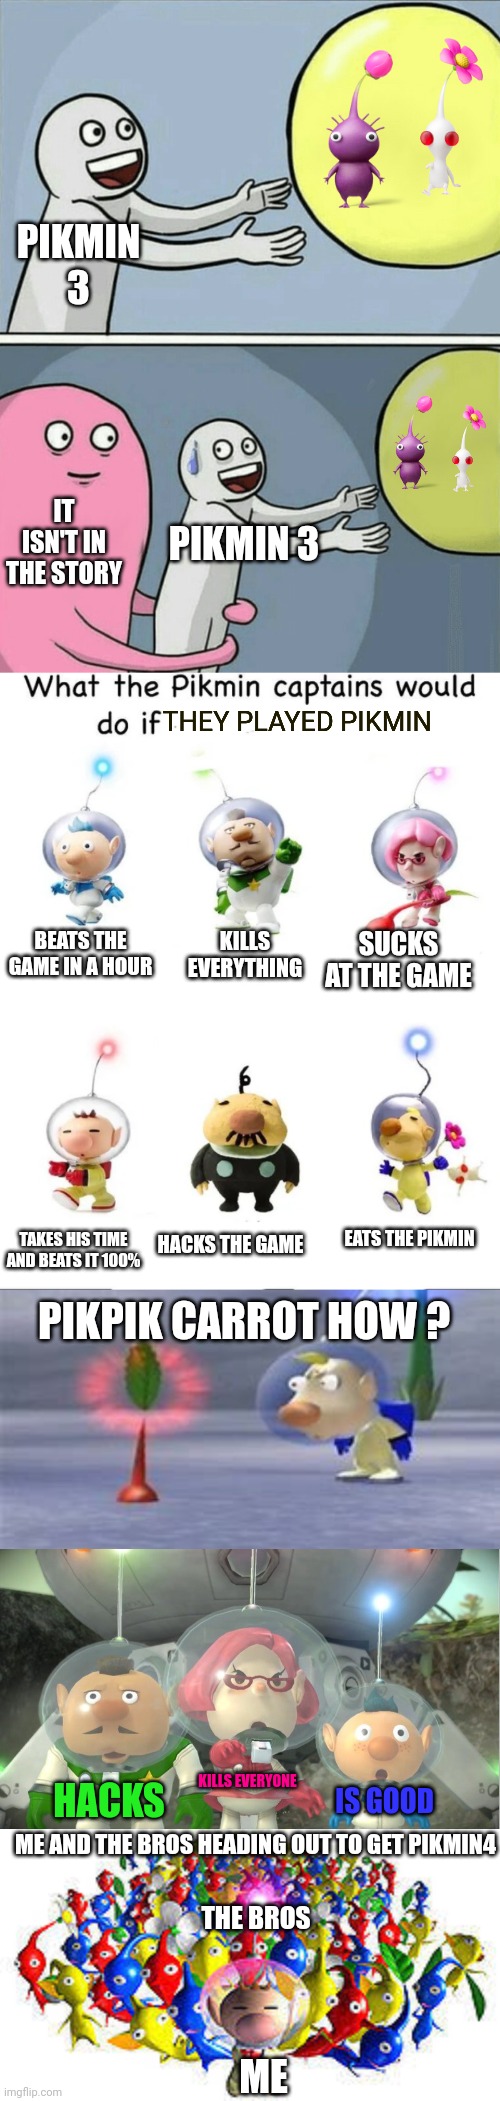 PIKMIN 3; IT ISN'T IN THE STORY; PIKMIN 3; THEY PLAYED PIKMIN; SUCKS AT THE GAME; BEATS THE GAME IN A HOUR; KILLS EVERYTHING; TAKES HIS TIME AND BEATS IT 100%; HACKS THE GAME; EATS THE PIKMIN; PIKPIK CARROT HOW ? KILLS EVERYONE; HACKS; IS GOOD; ME AND THE BROS HEADING OUT TO GET PIKMIN4; THE BROS; ME | image tagged in memes,running away balloon,what would the pikmin captains do if,surprised louie,britney mad,pikmins | made w/ Imgflip meme maker